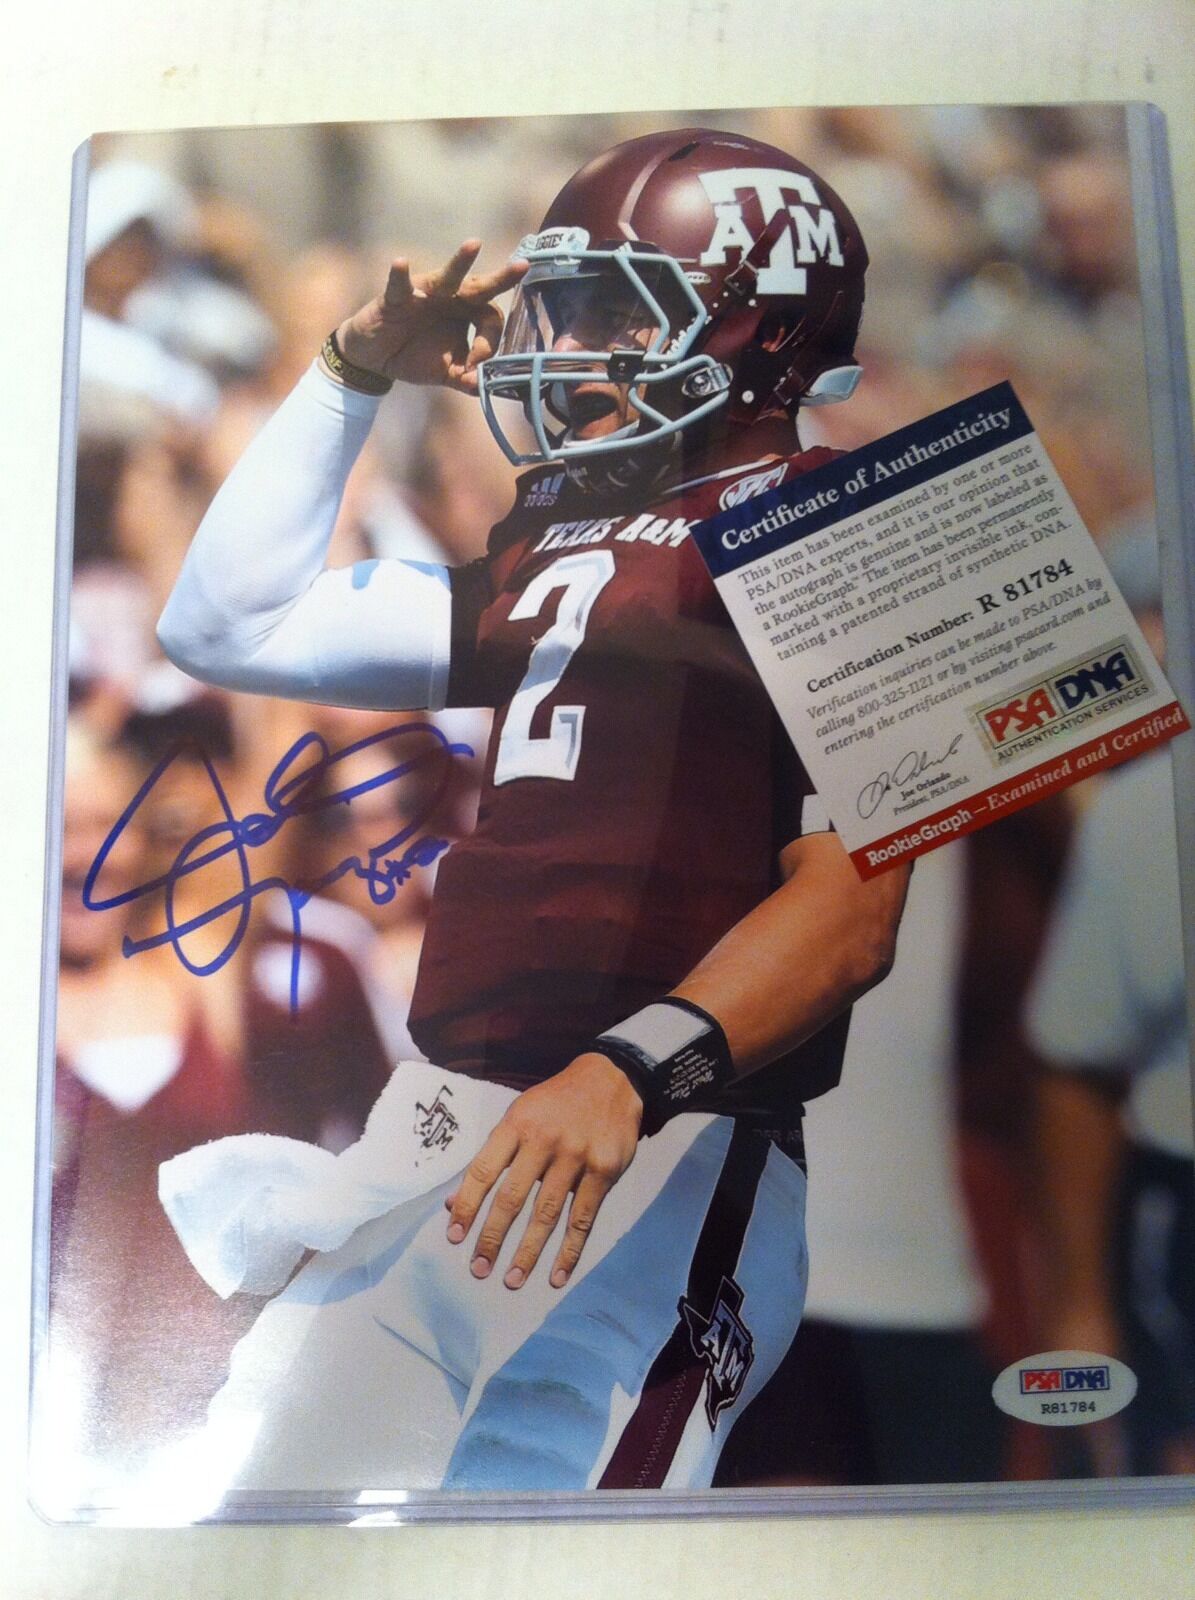 Johnny Manziel Signed Auto AUTOGRAPH TEXAS A&M 8x10 Photo Poster painting PSA CERTIFIED BROWNS